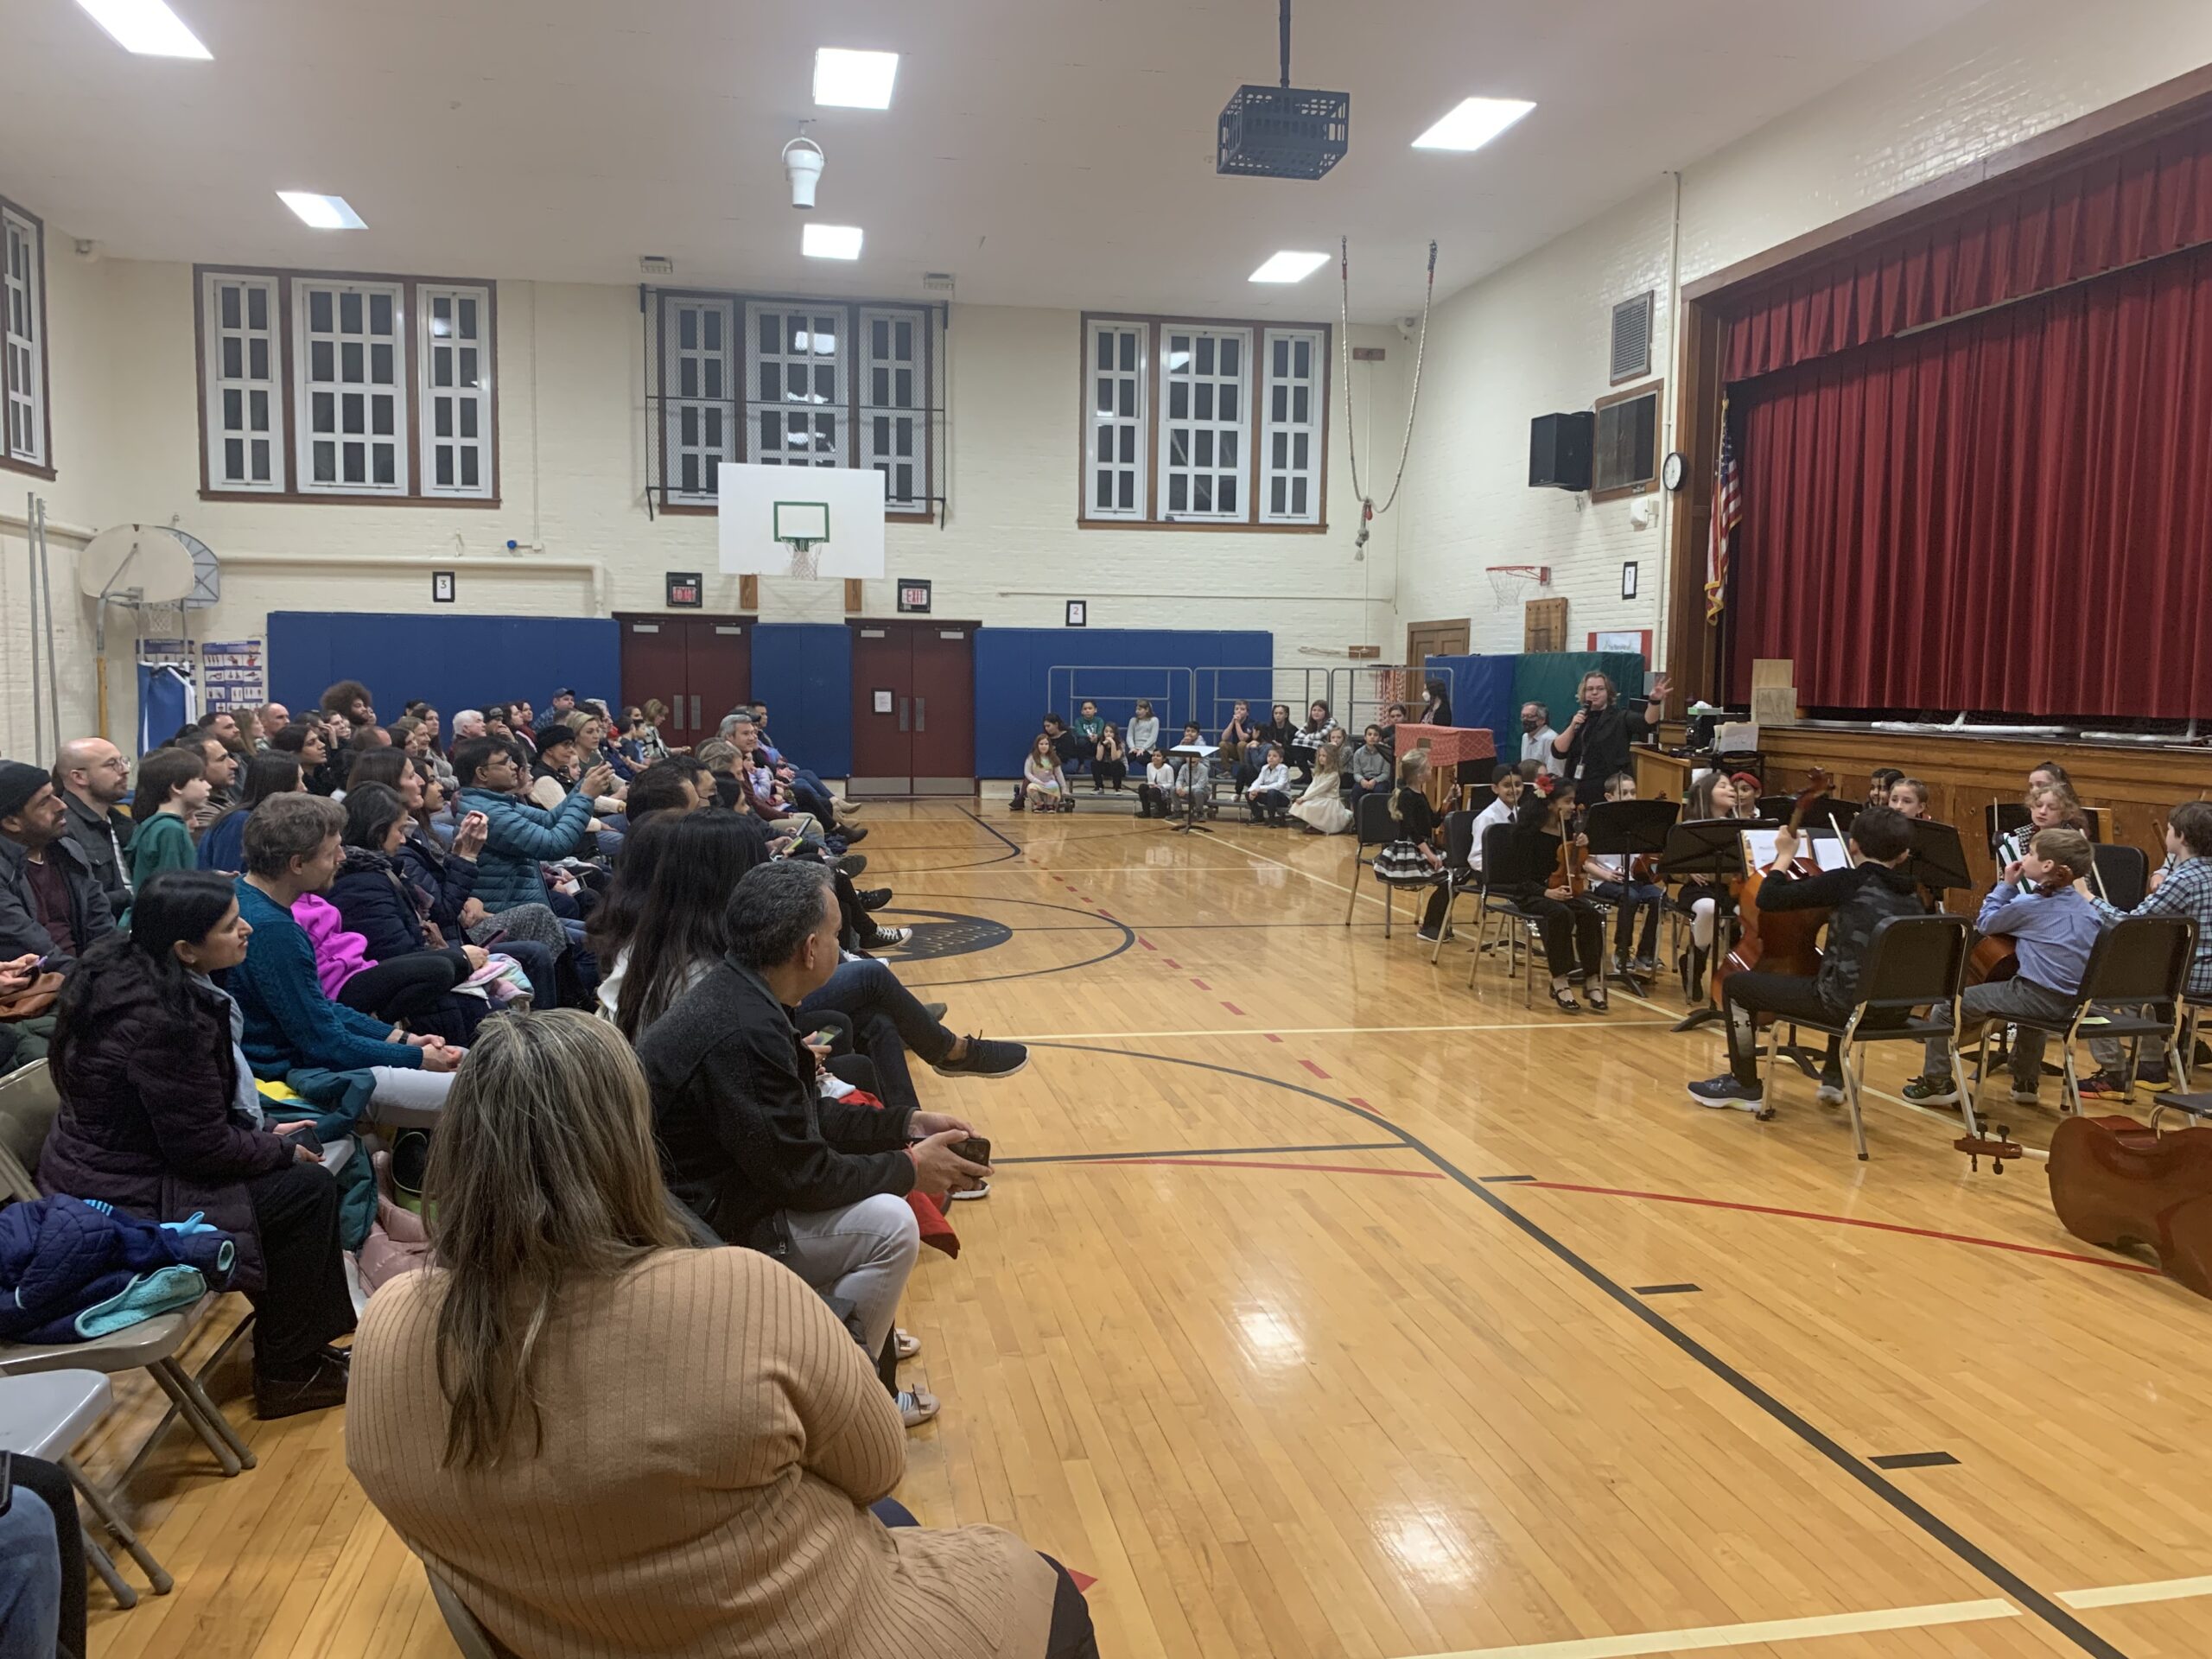 student orchestra and choir in school gym